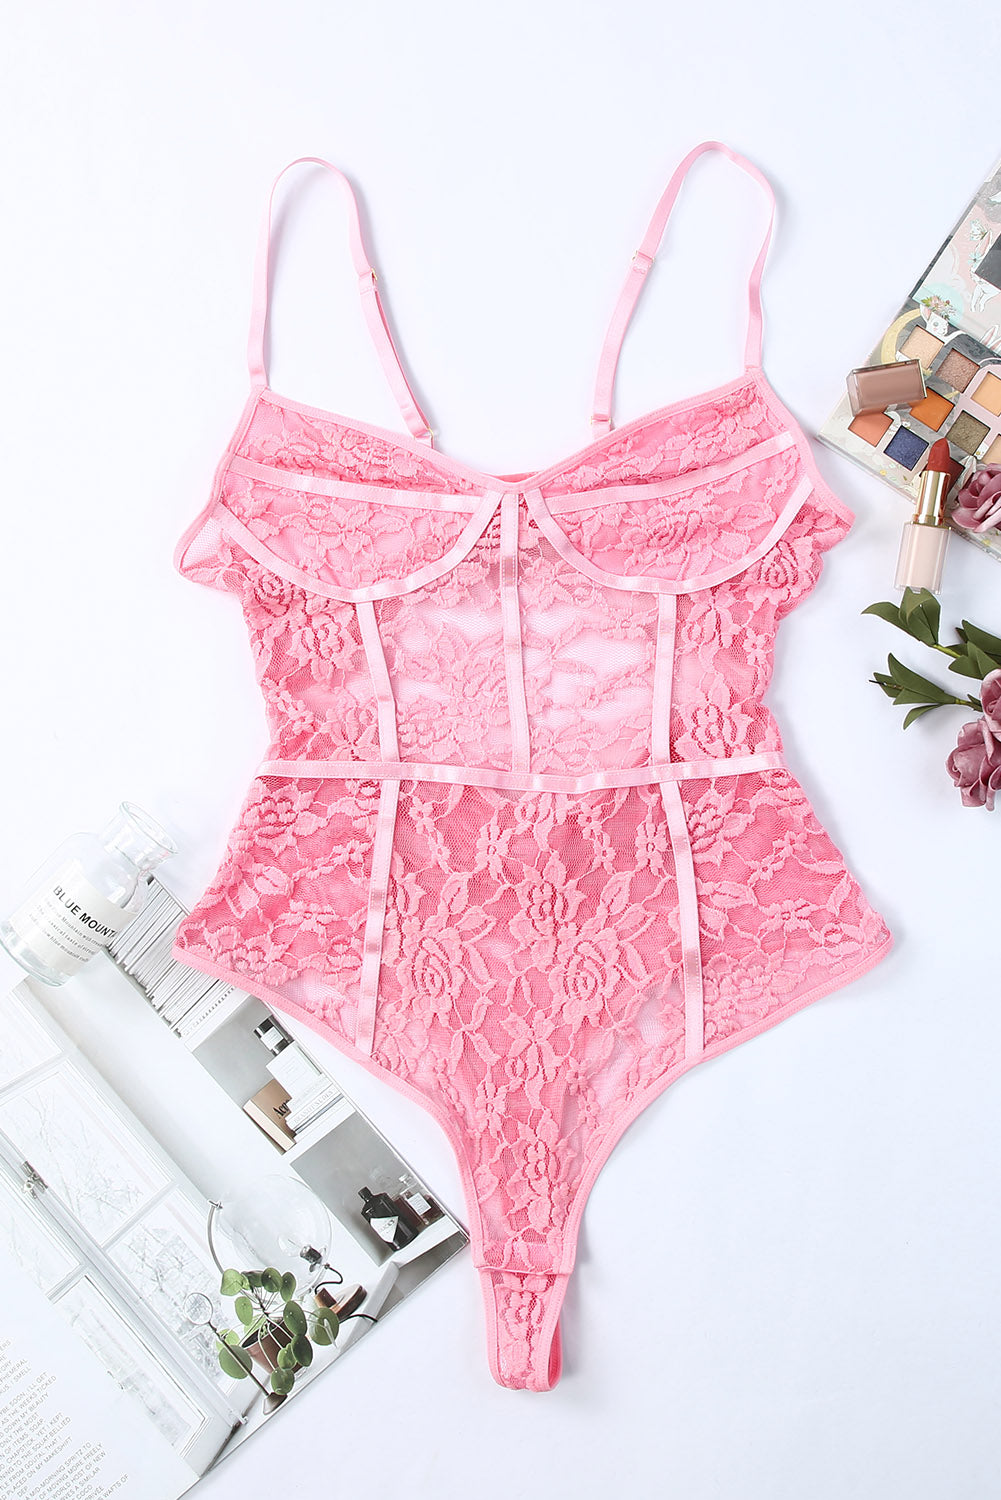 Pink Spaghetti Straps Floral Lace Crochet Teddy Lingerie